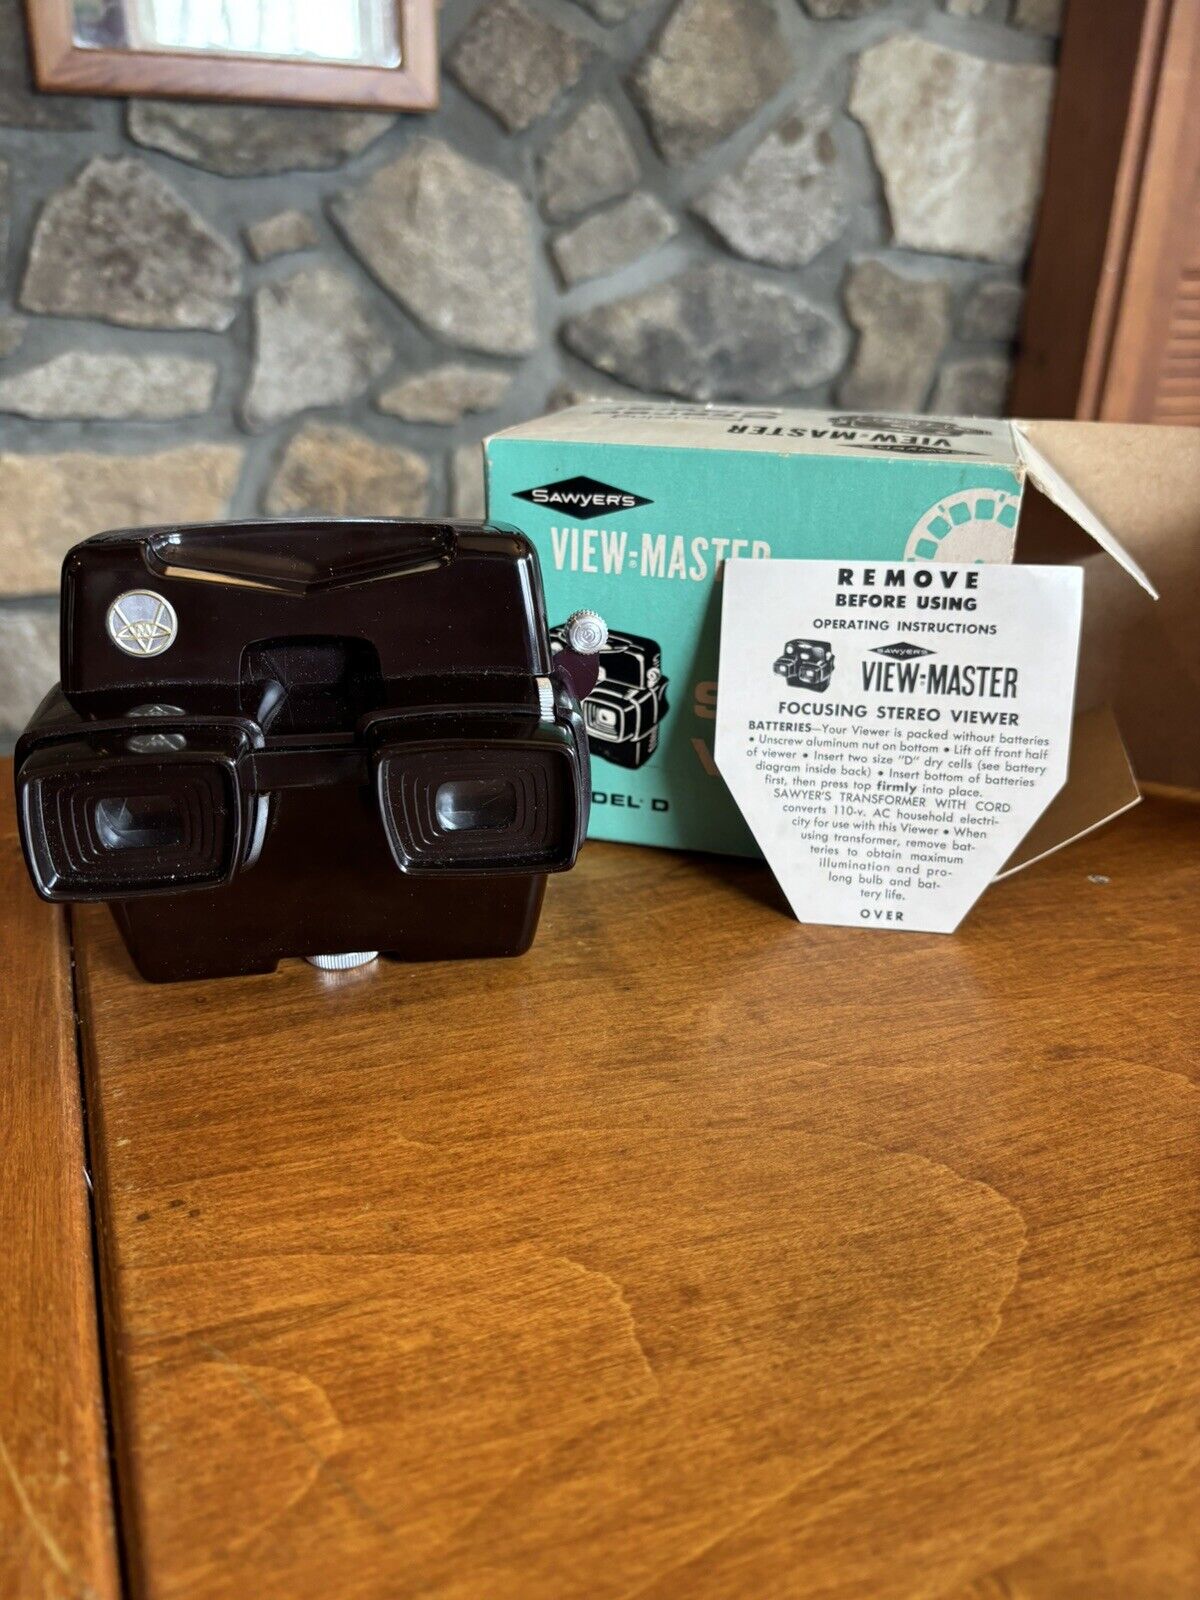 Vintage Sawyer\'s View-Master Stereo Focusing Viewer - Model D Product No. 2011